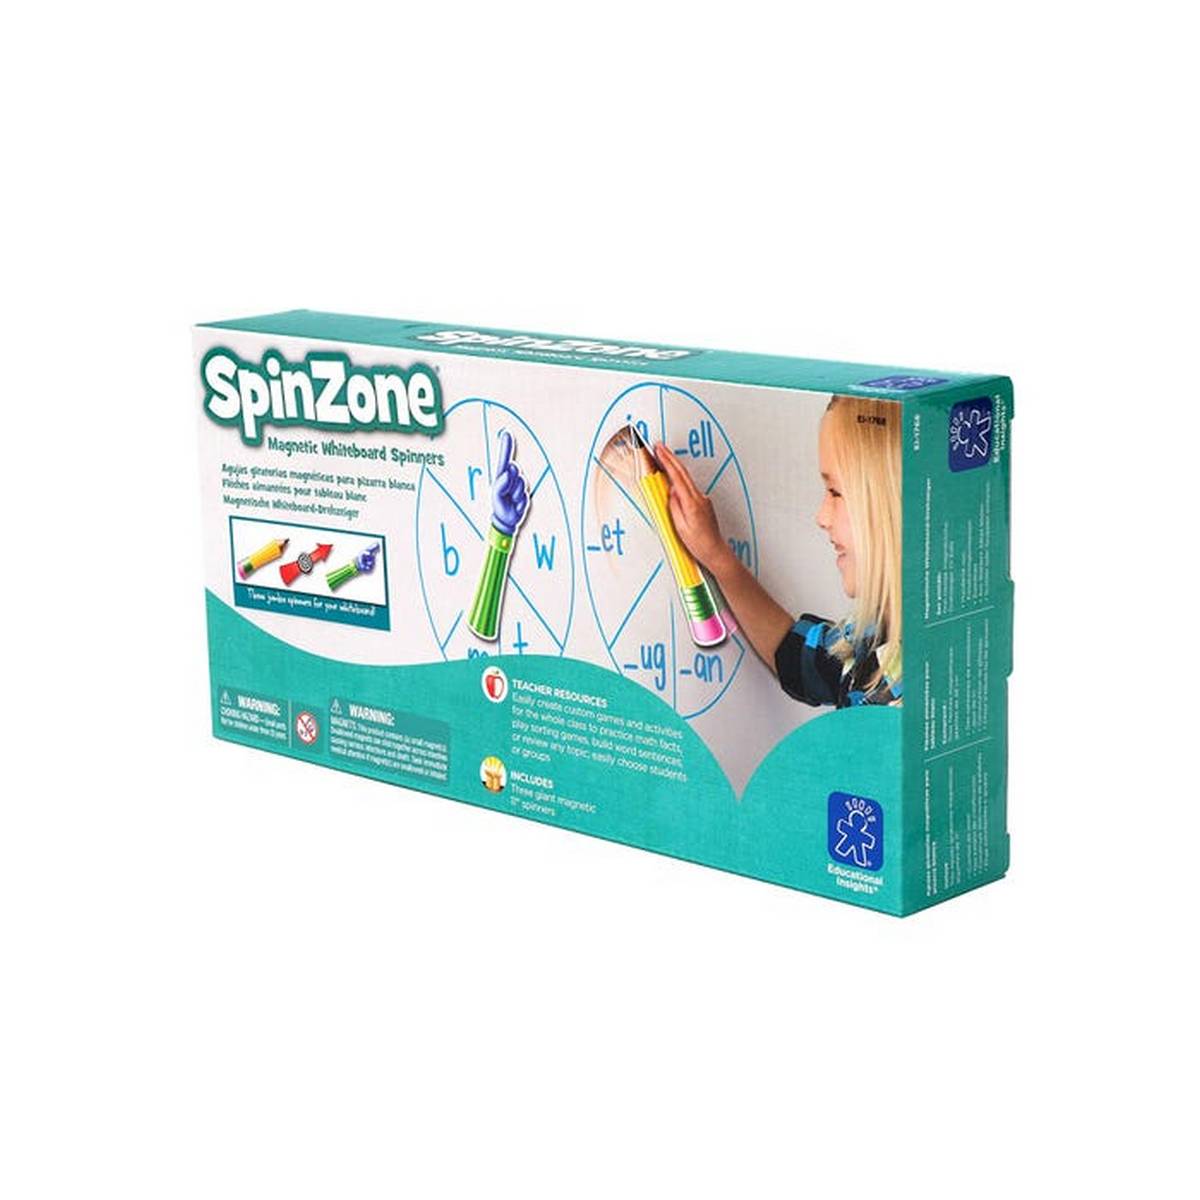 Spinzone Magnetic Whiteboard Spinners – ABC School Supplies